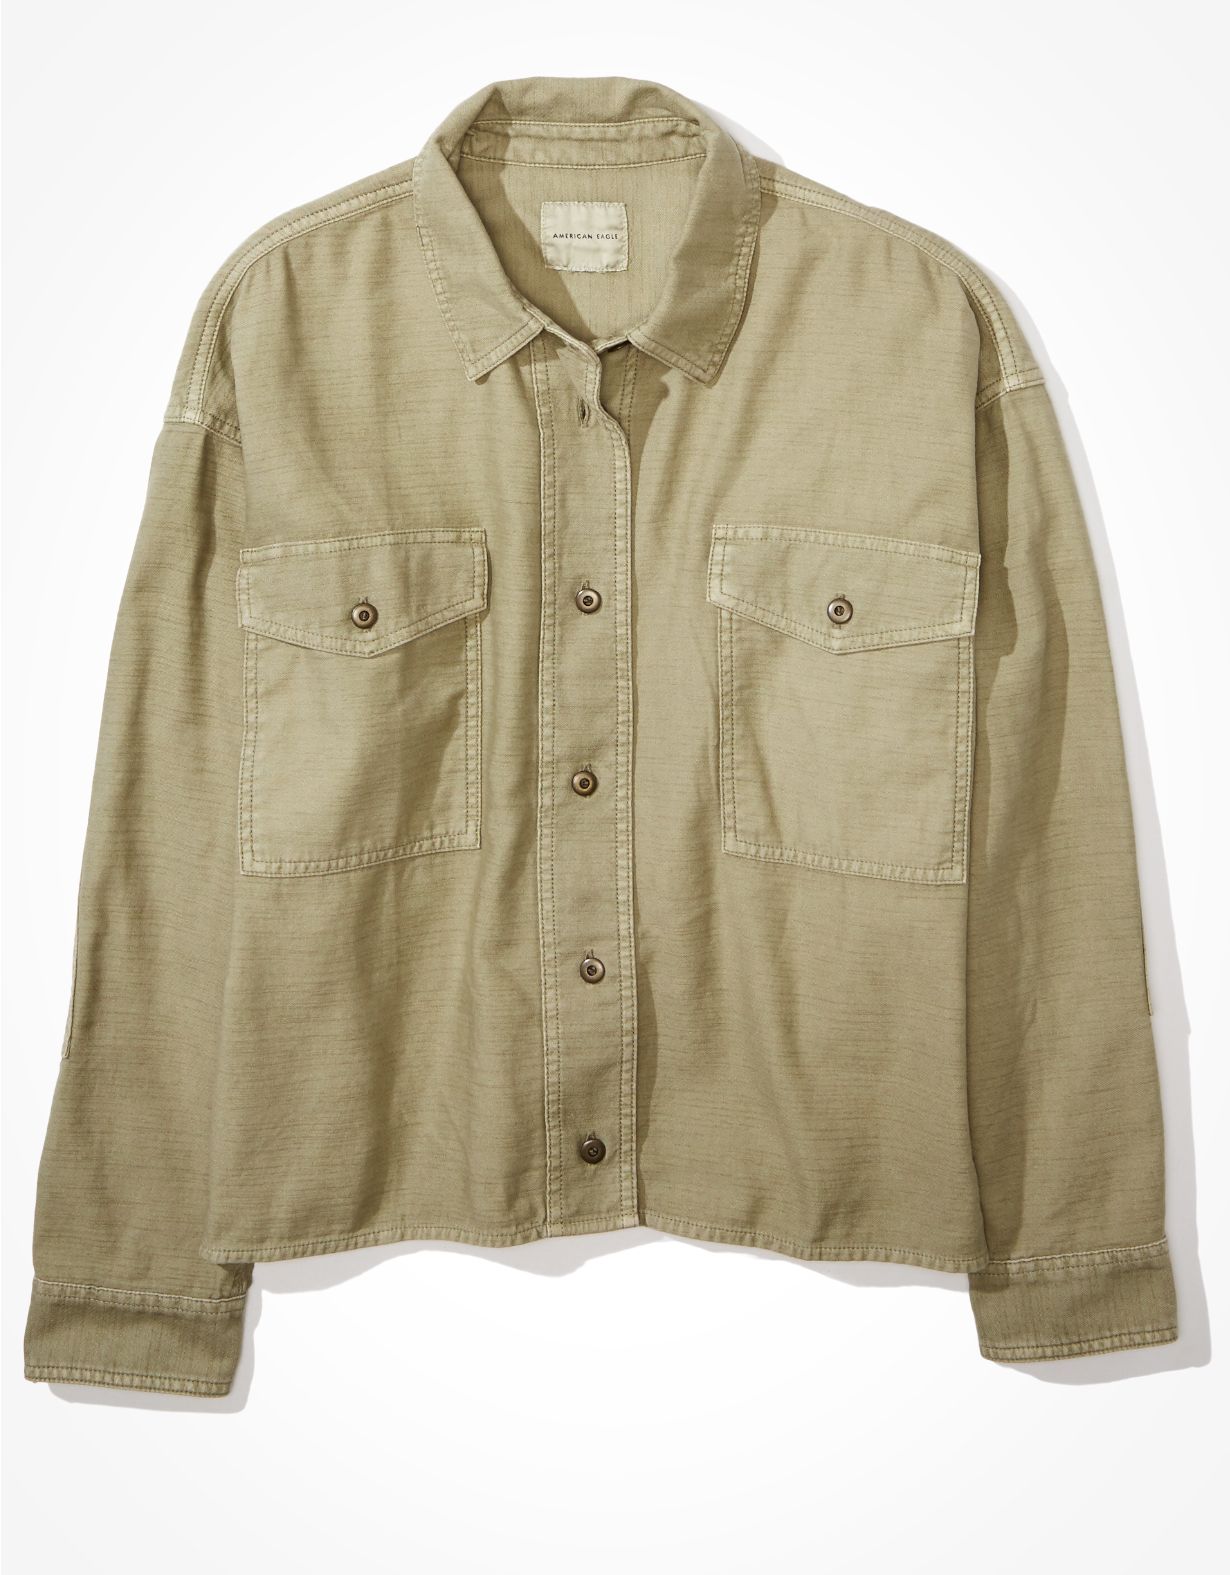 AE Button Up Shirt Jacket